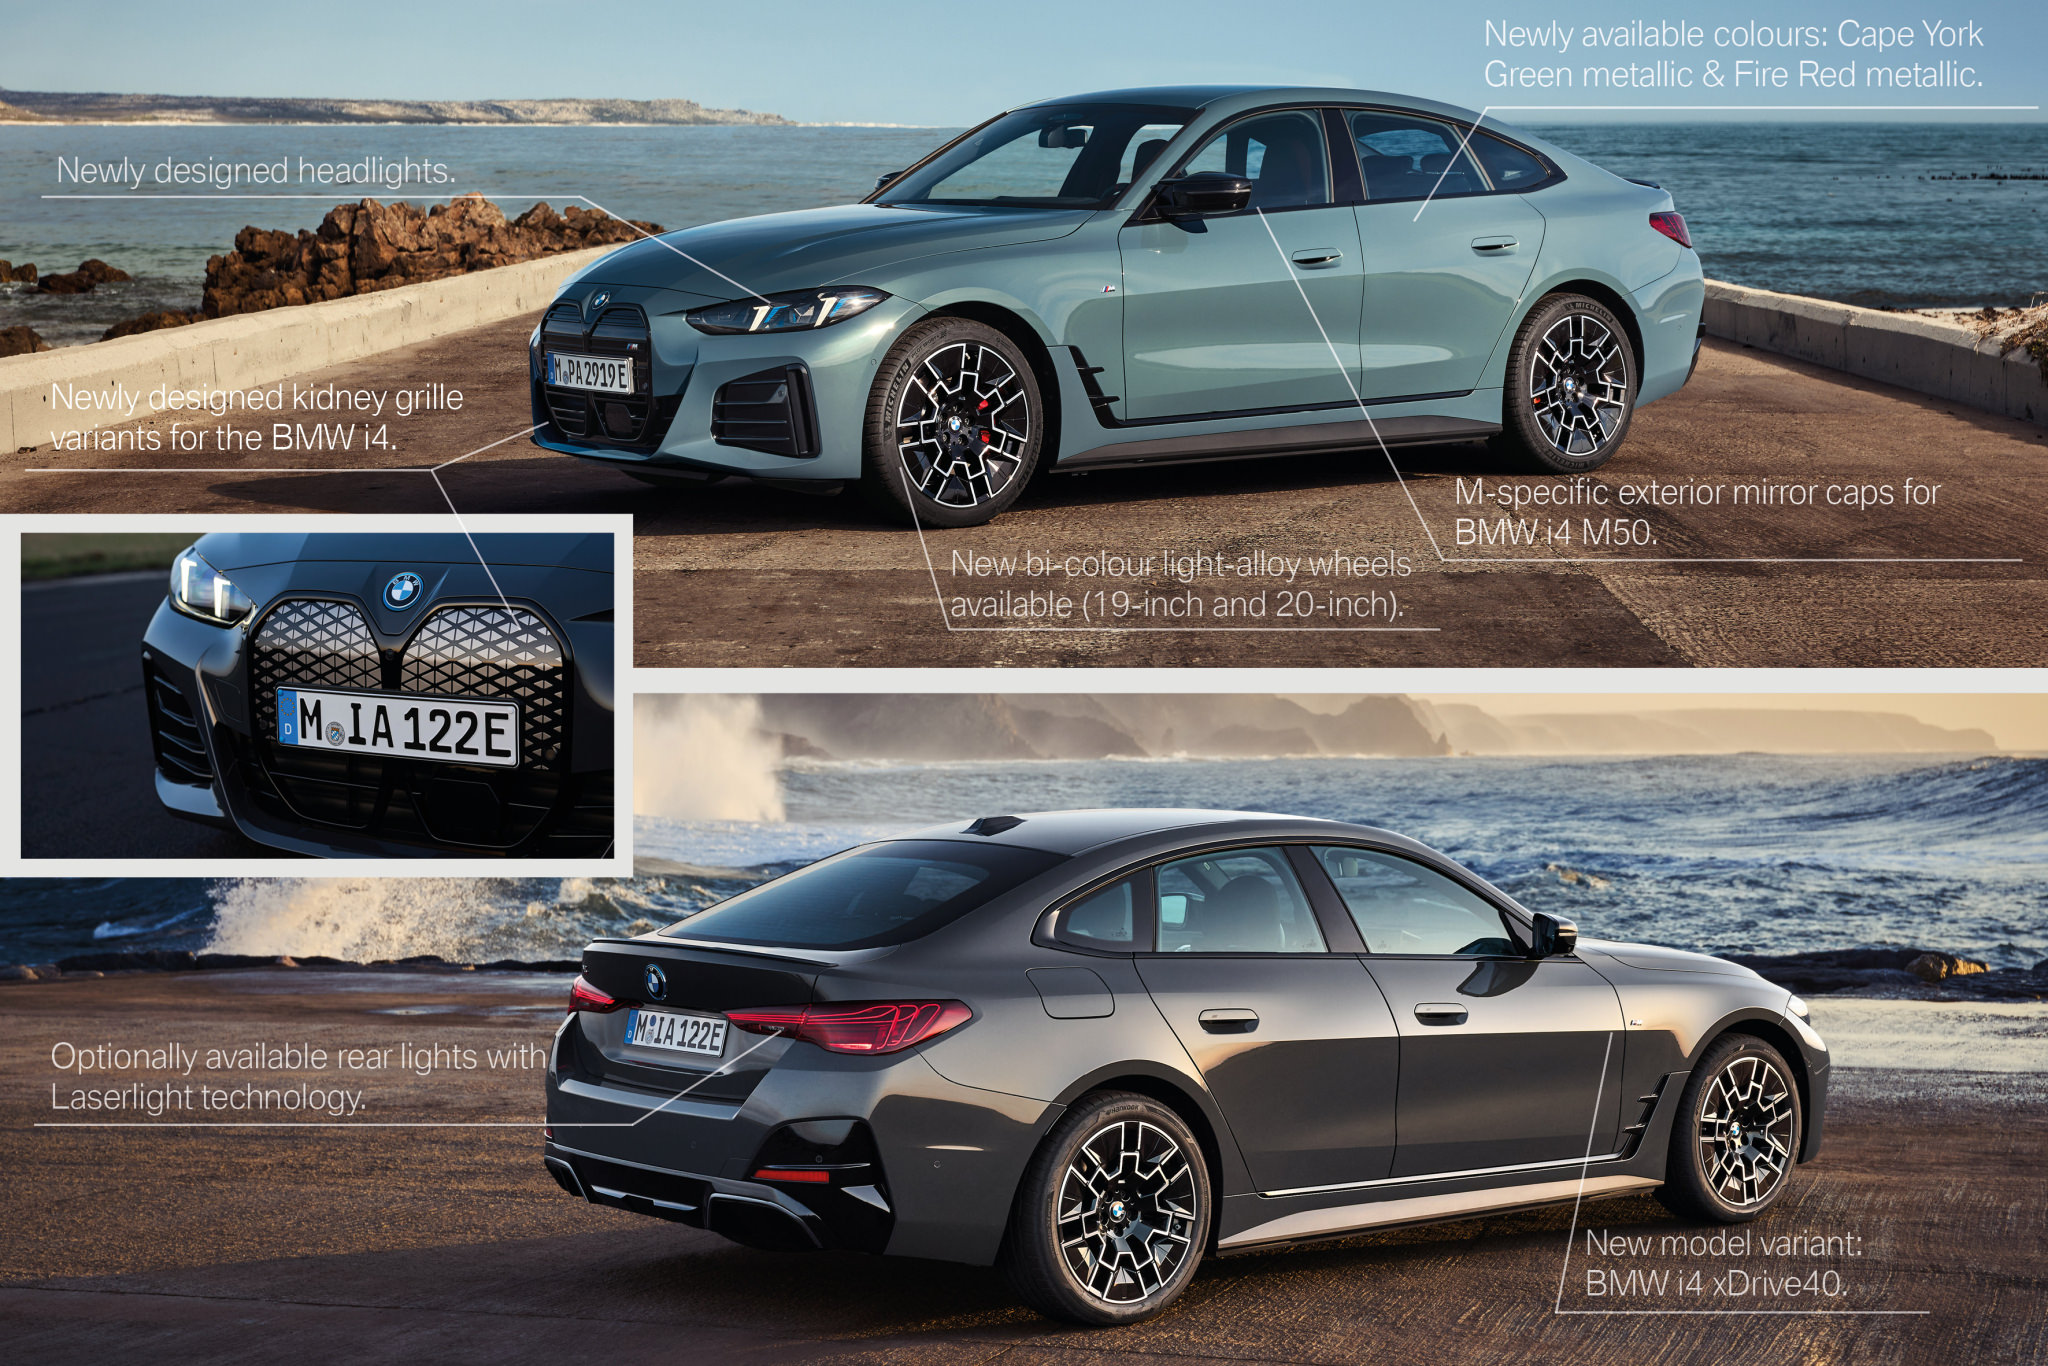 The new BMW i4 M50 xDrive – Exterieur (Cape York Green)